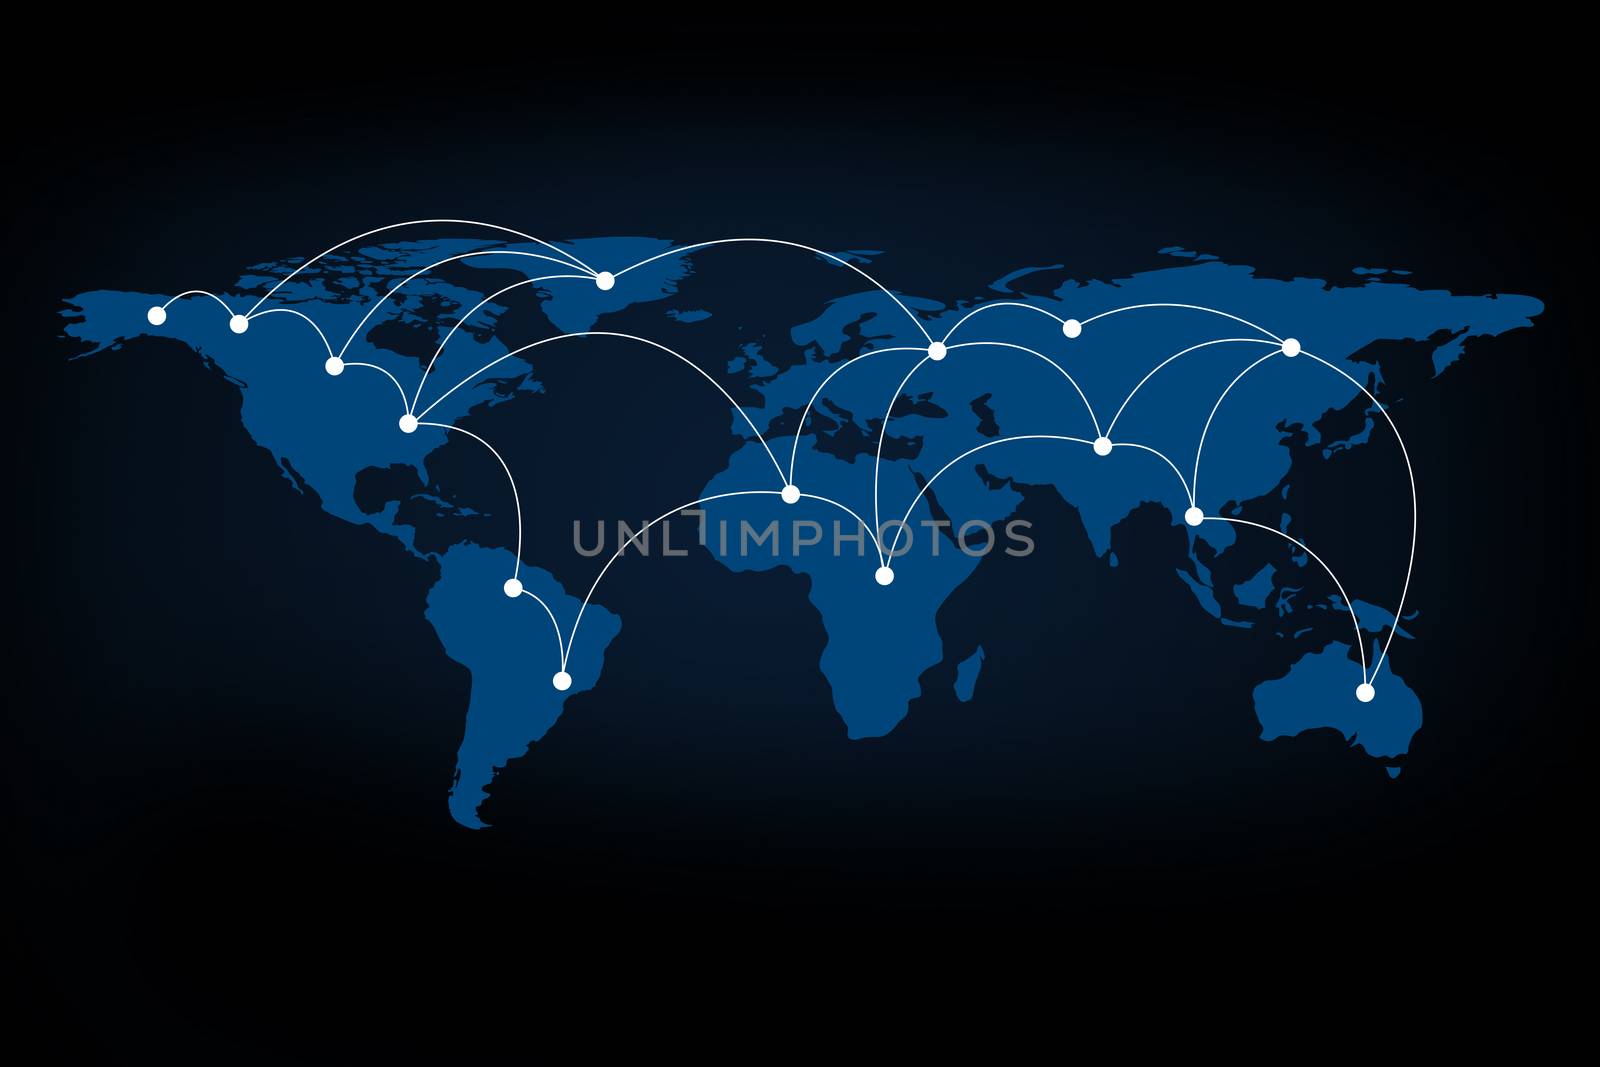 Global networking symbol of international communication featuring a world map concept with connecting technology communities using computers and other digital devices, Elements of this image furnished by NASA